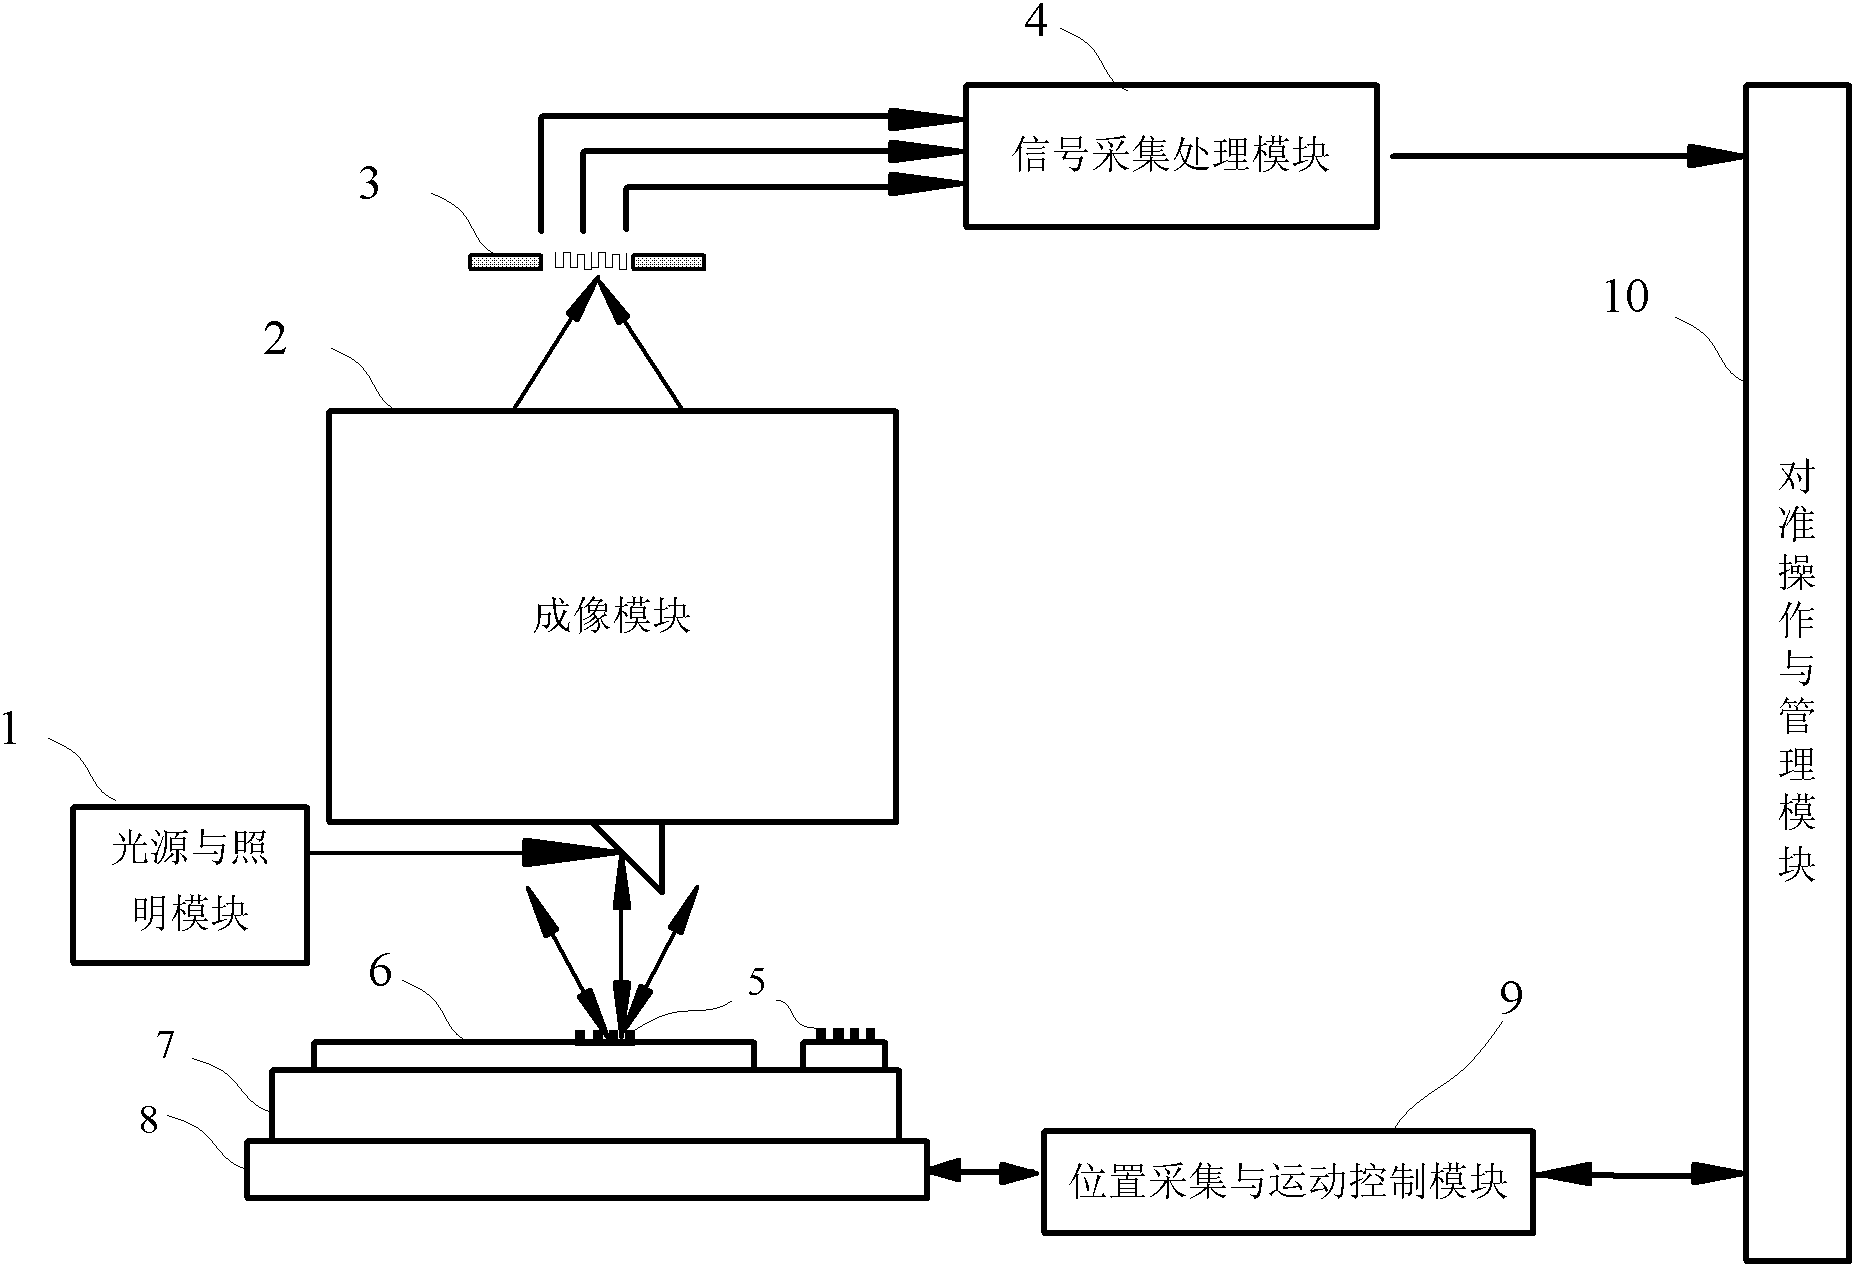 Off-axis signal processing method